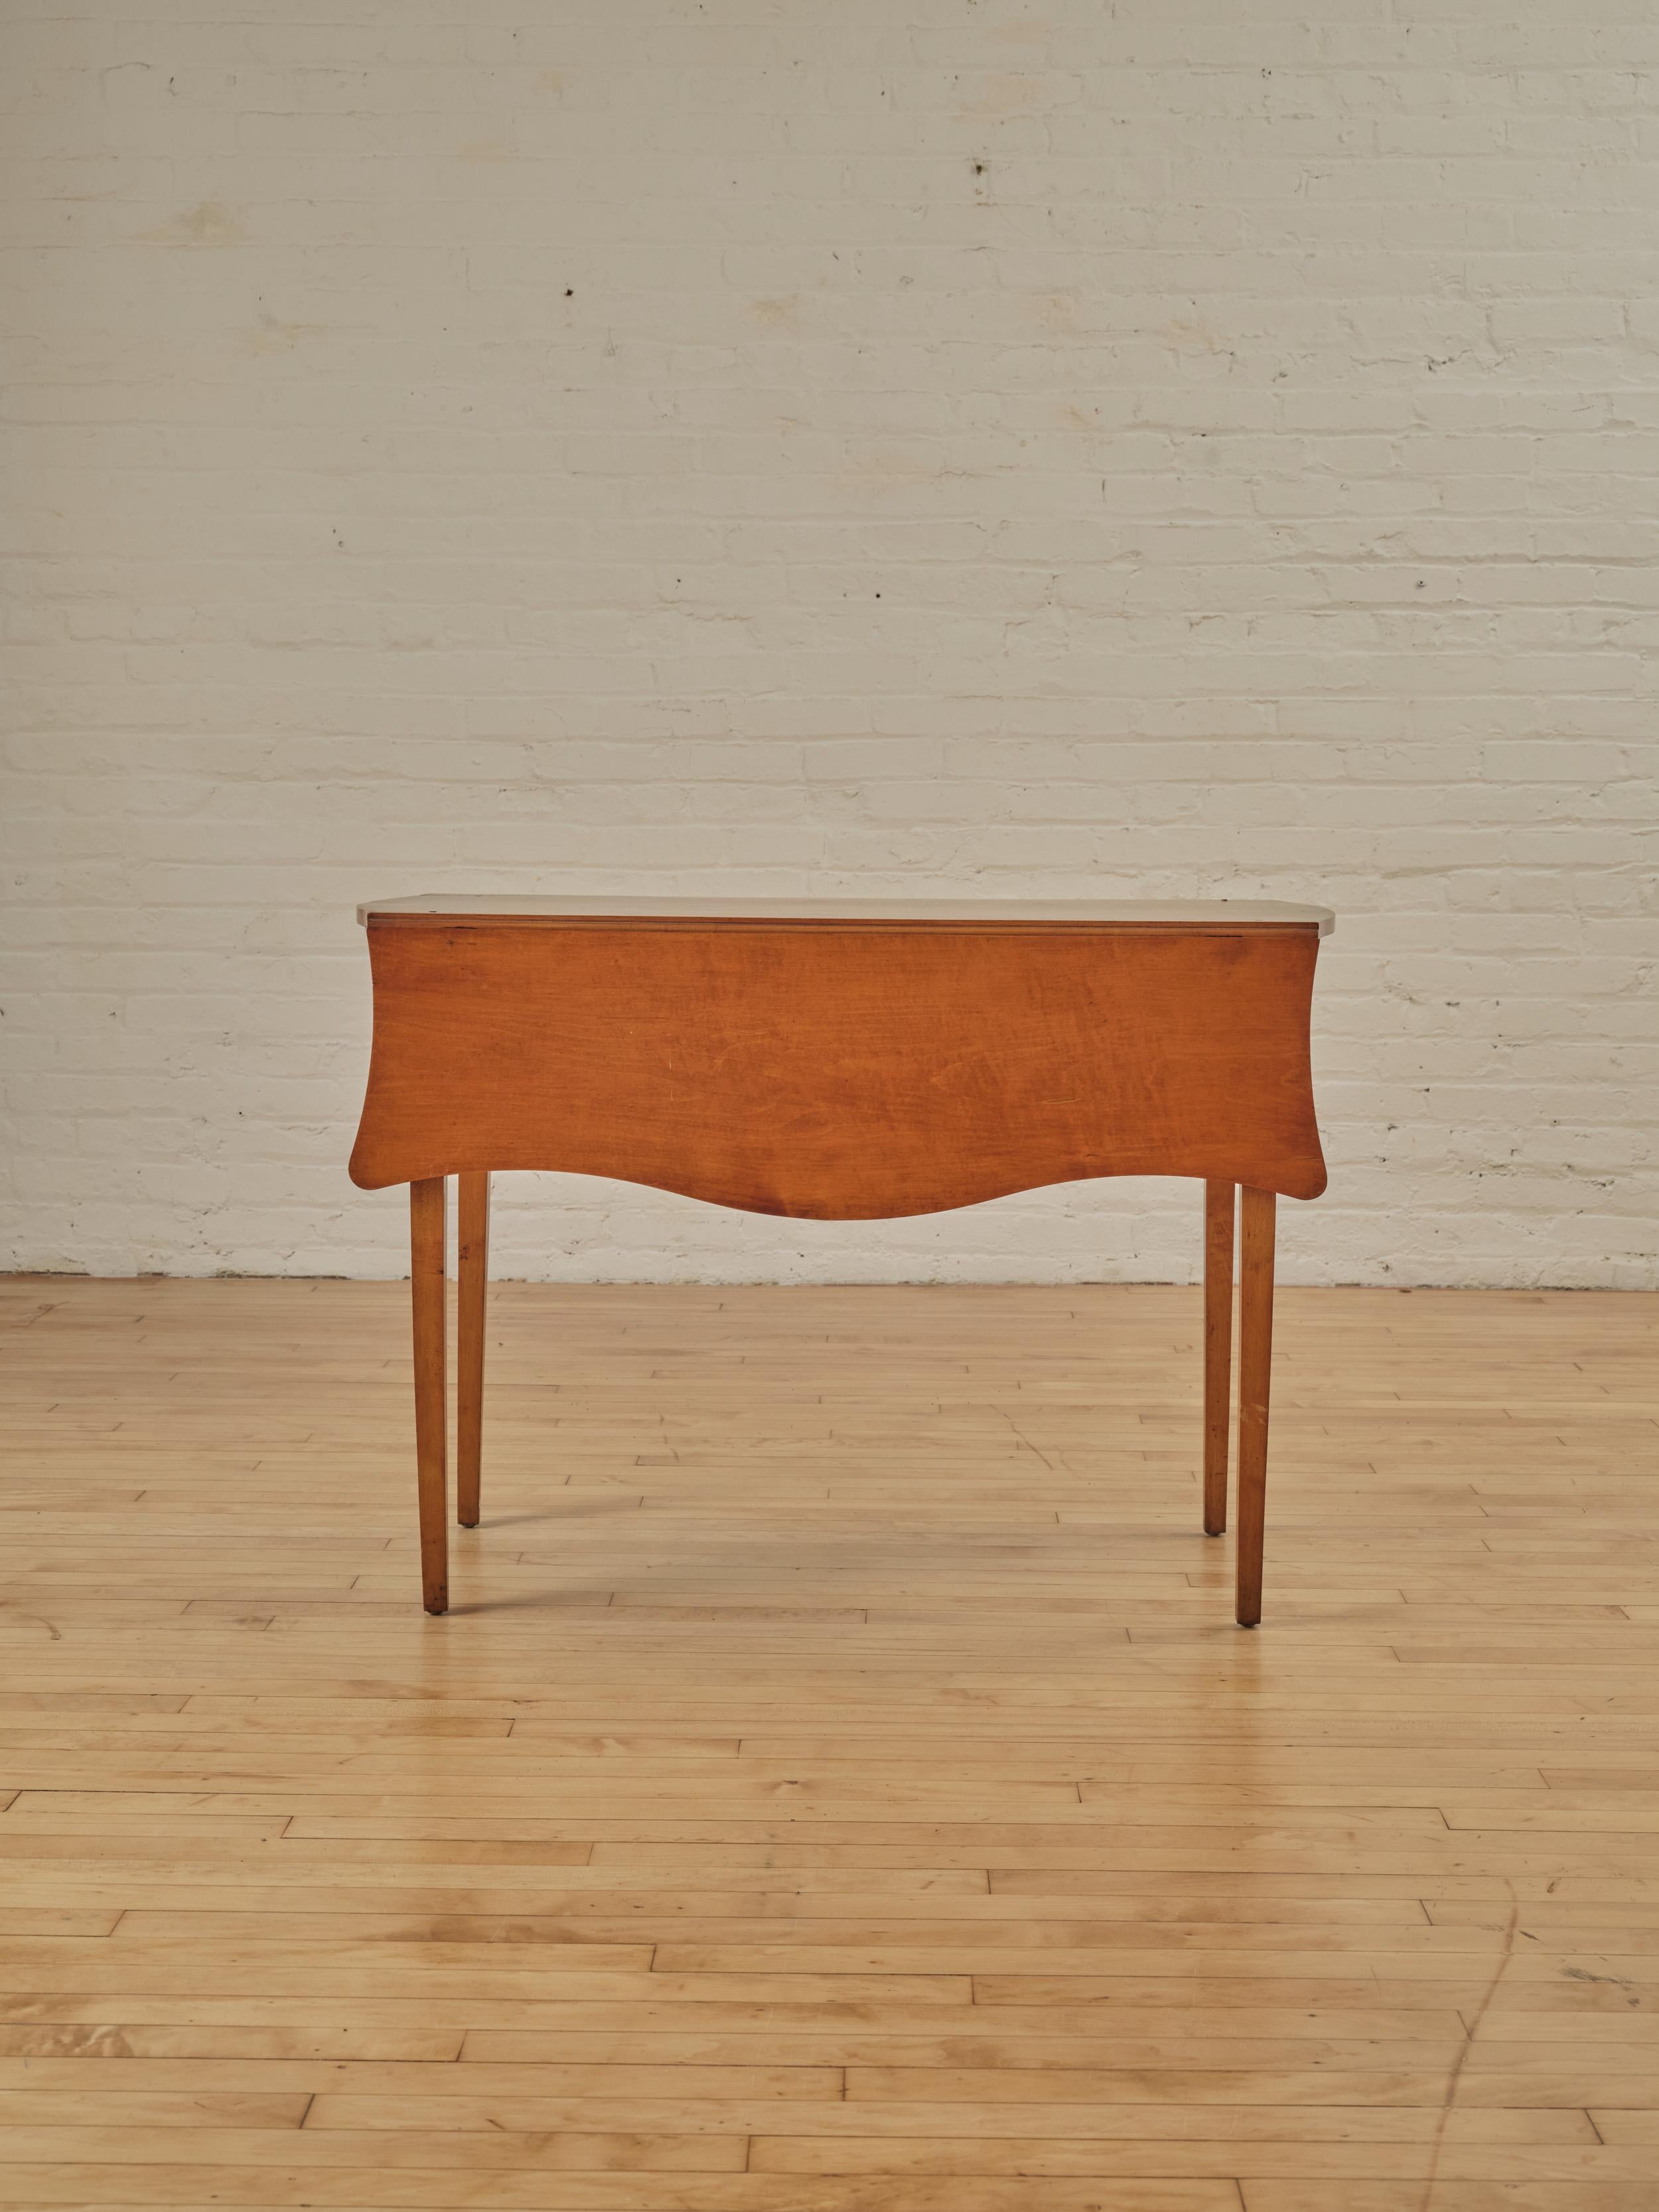 Maple Scalloped Drop Leaf Table featuring tapered legs.

Technical Details:

Dimensions: Closed: 28